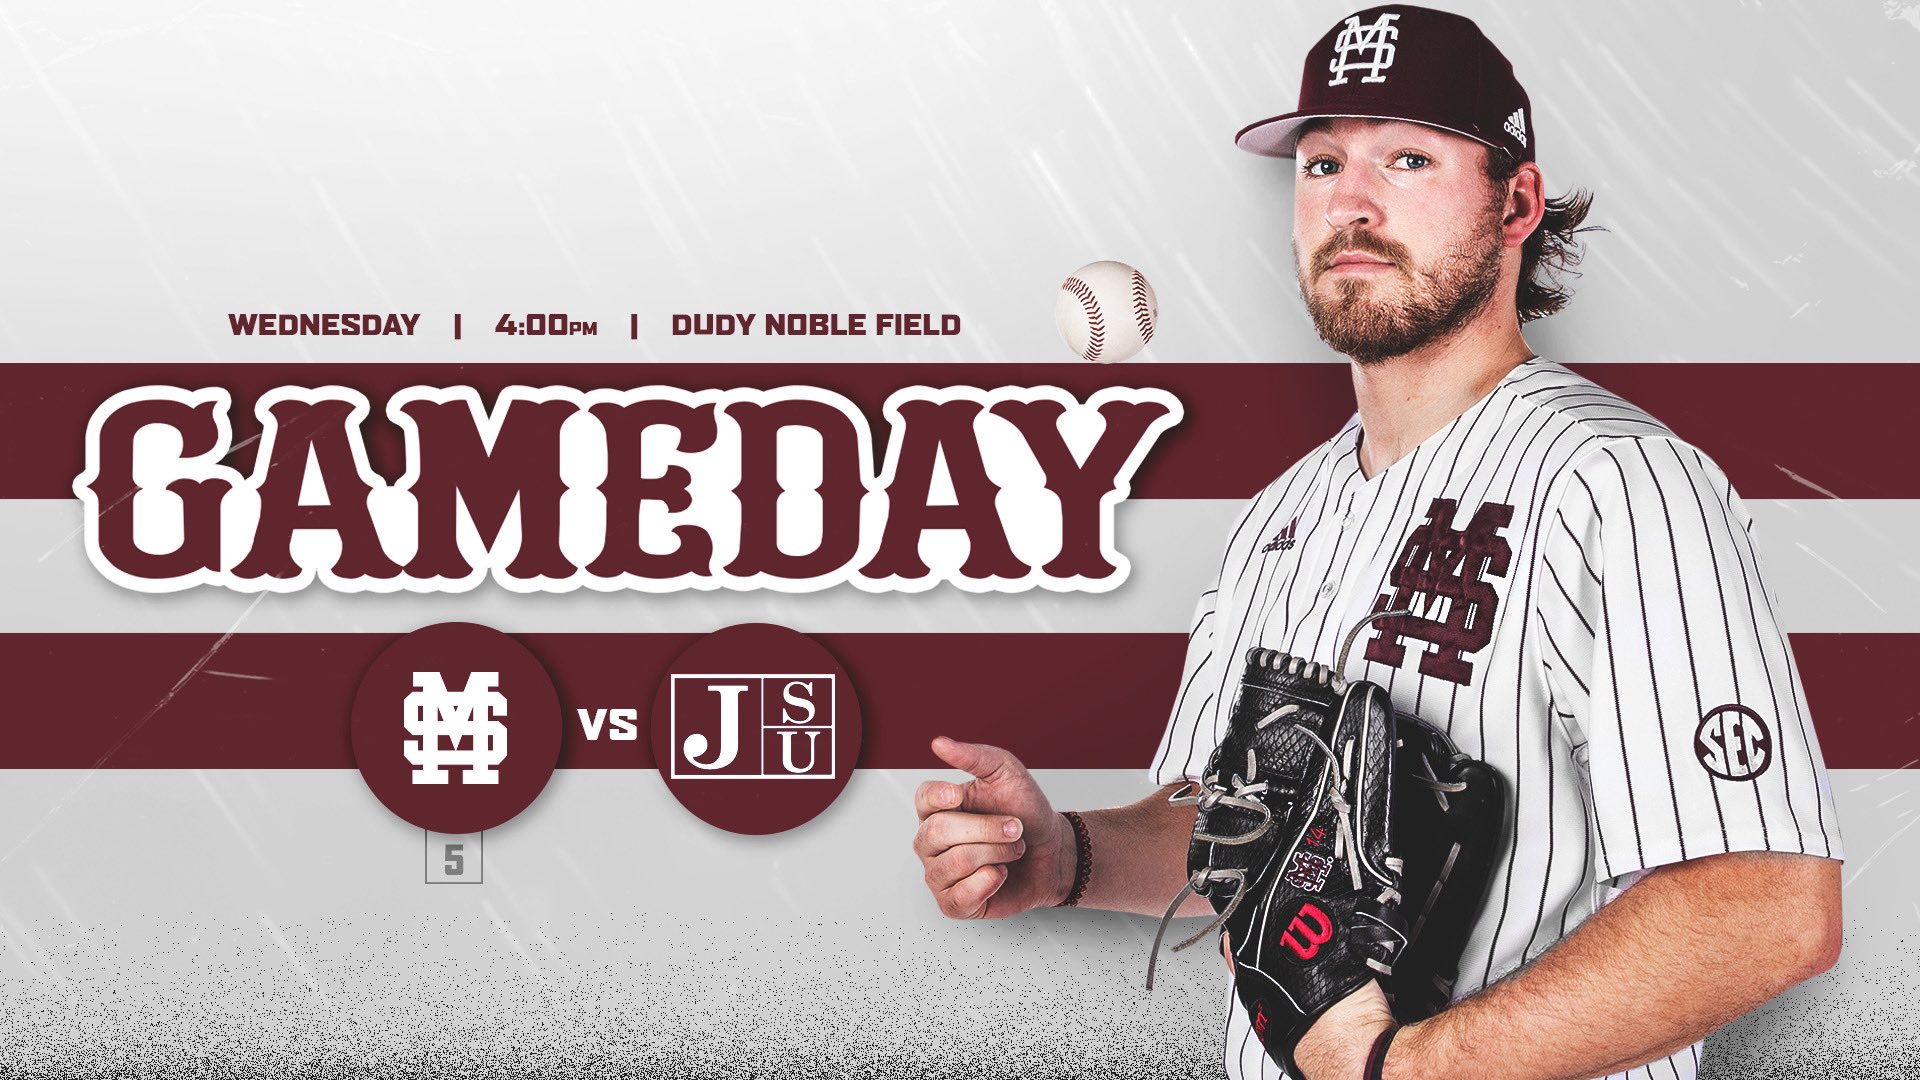 Gameday graphic with MSU baseball player Riley Self wearing a glove and tossing a baseball up in the air